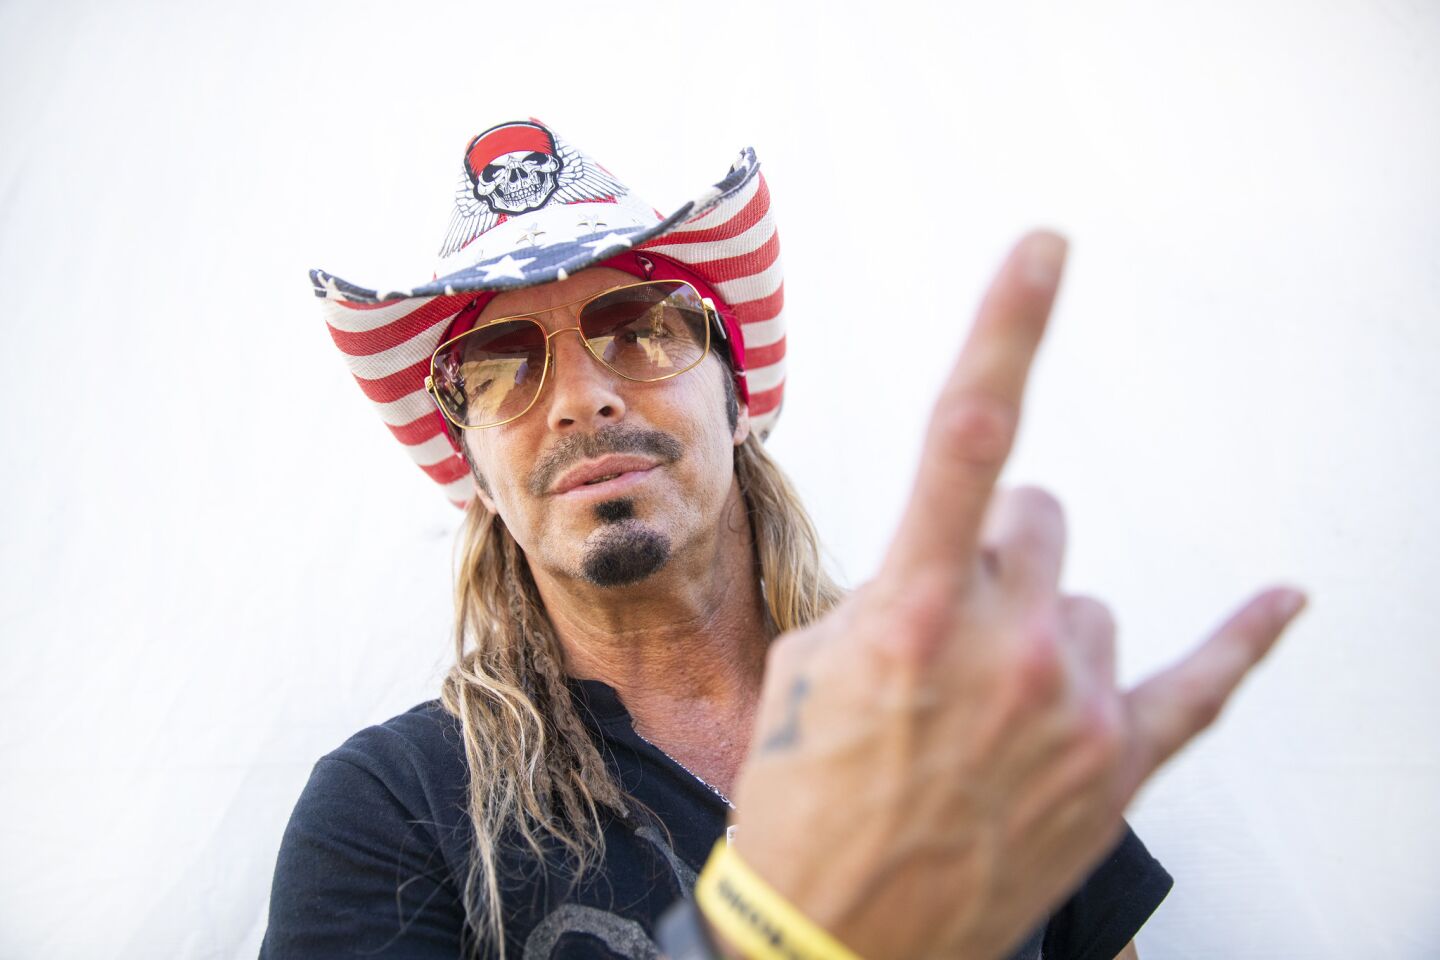 Bret Michaels before his performance at Stagecoach.